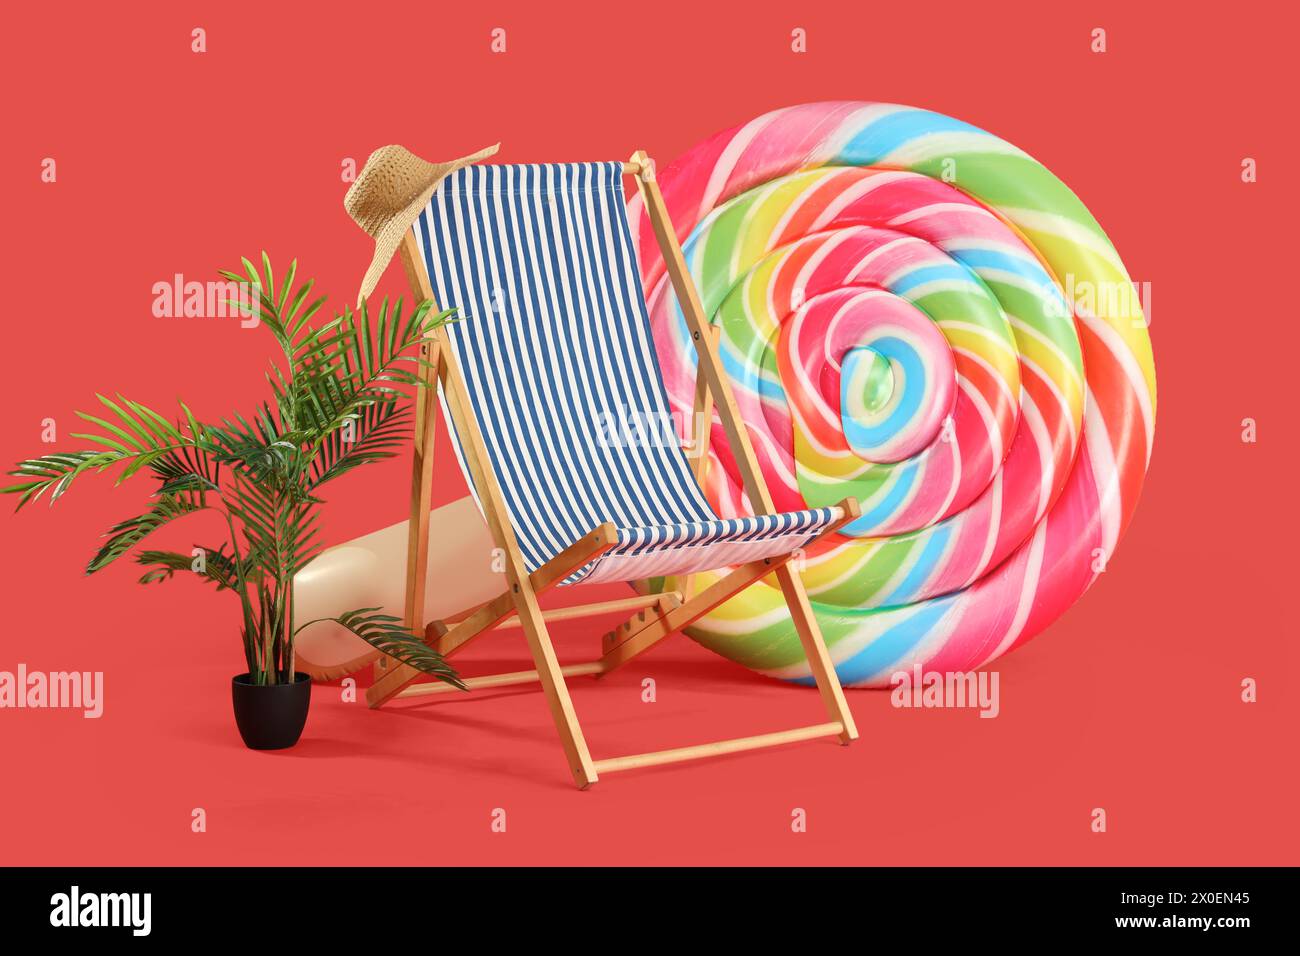 Sun lounger, plant and inflatable mattress in shape of candy on red background Stock Photo